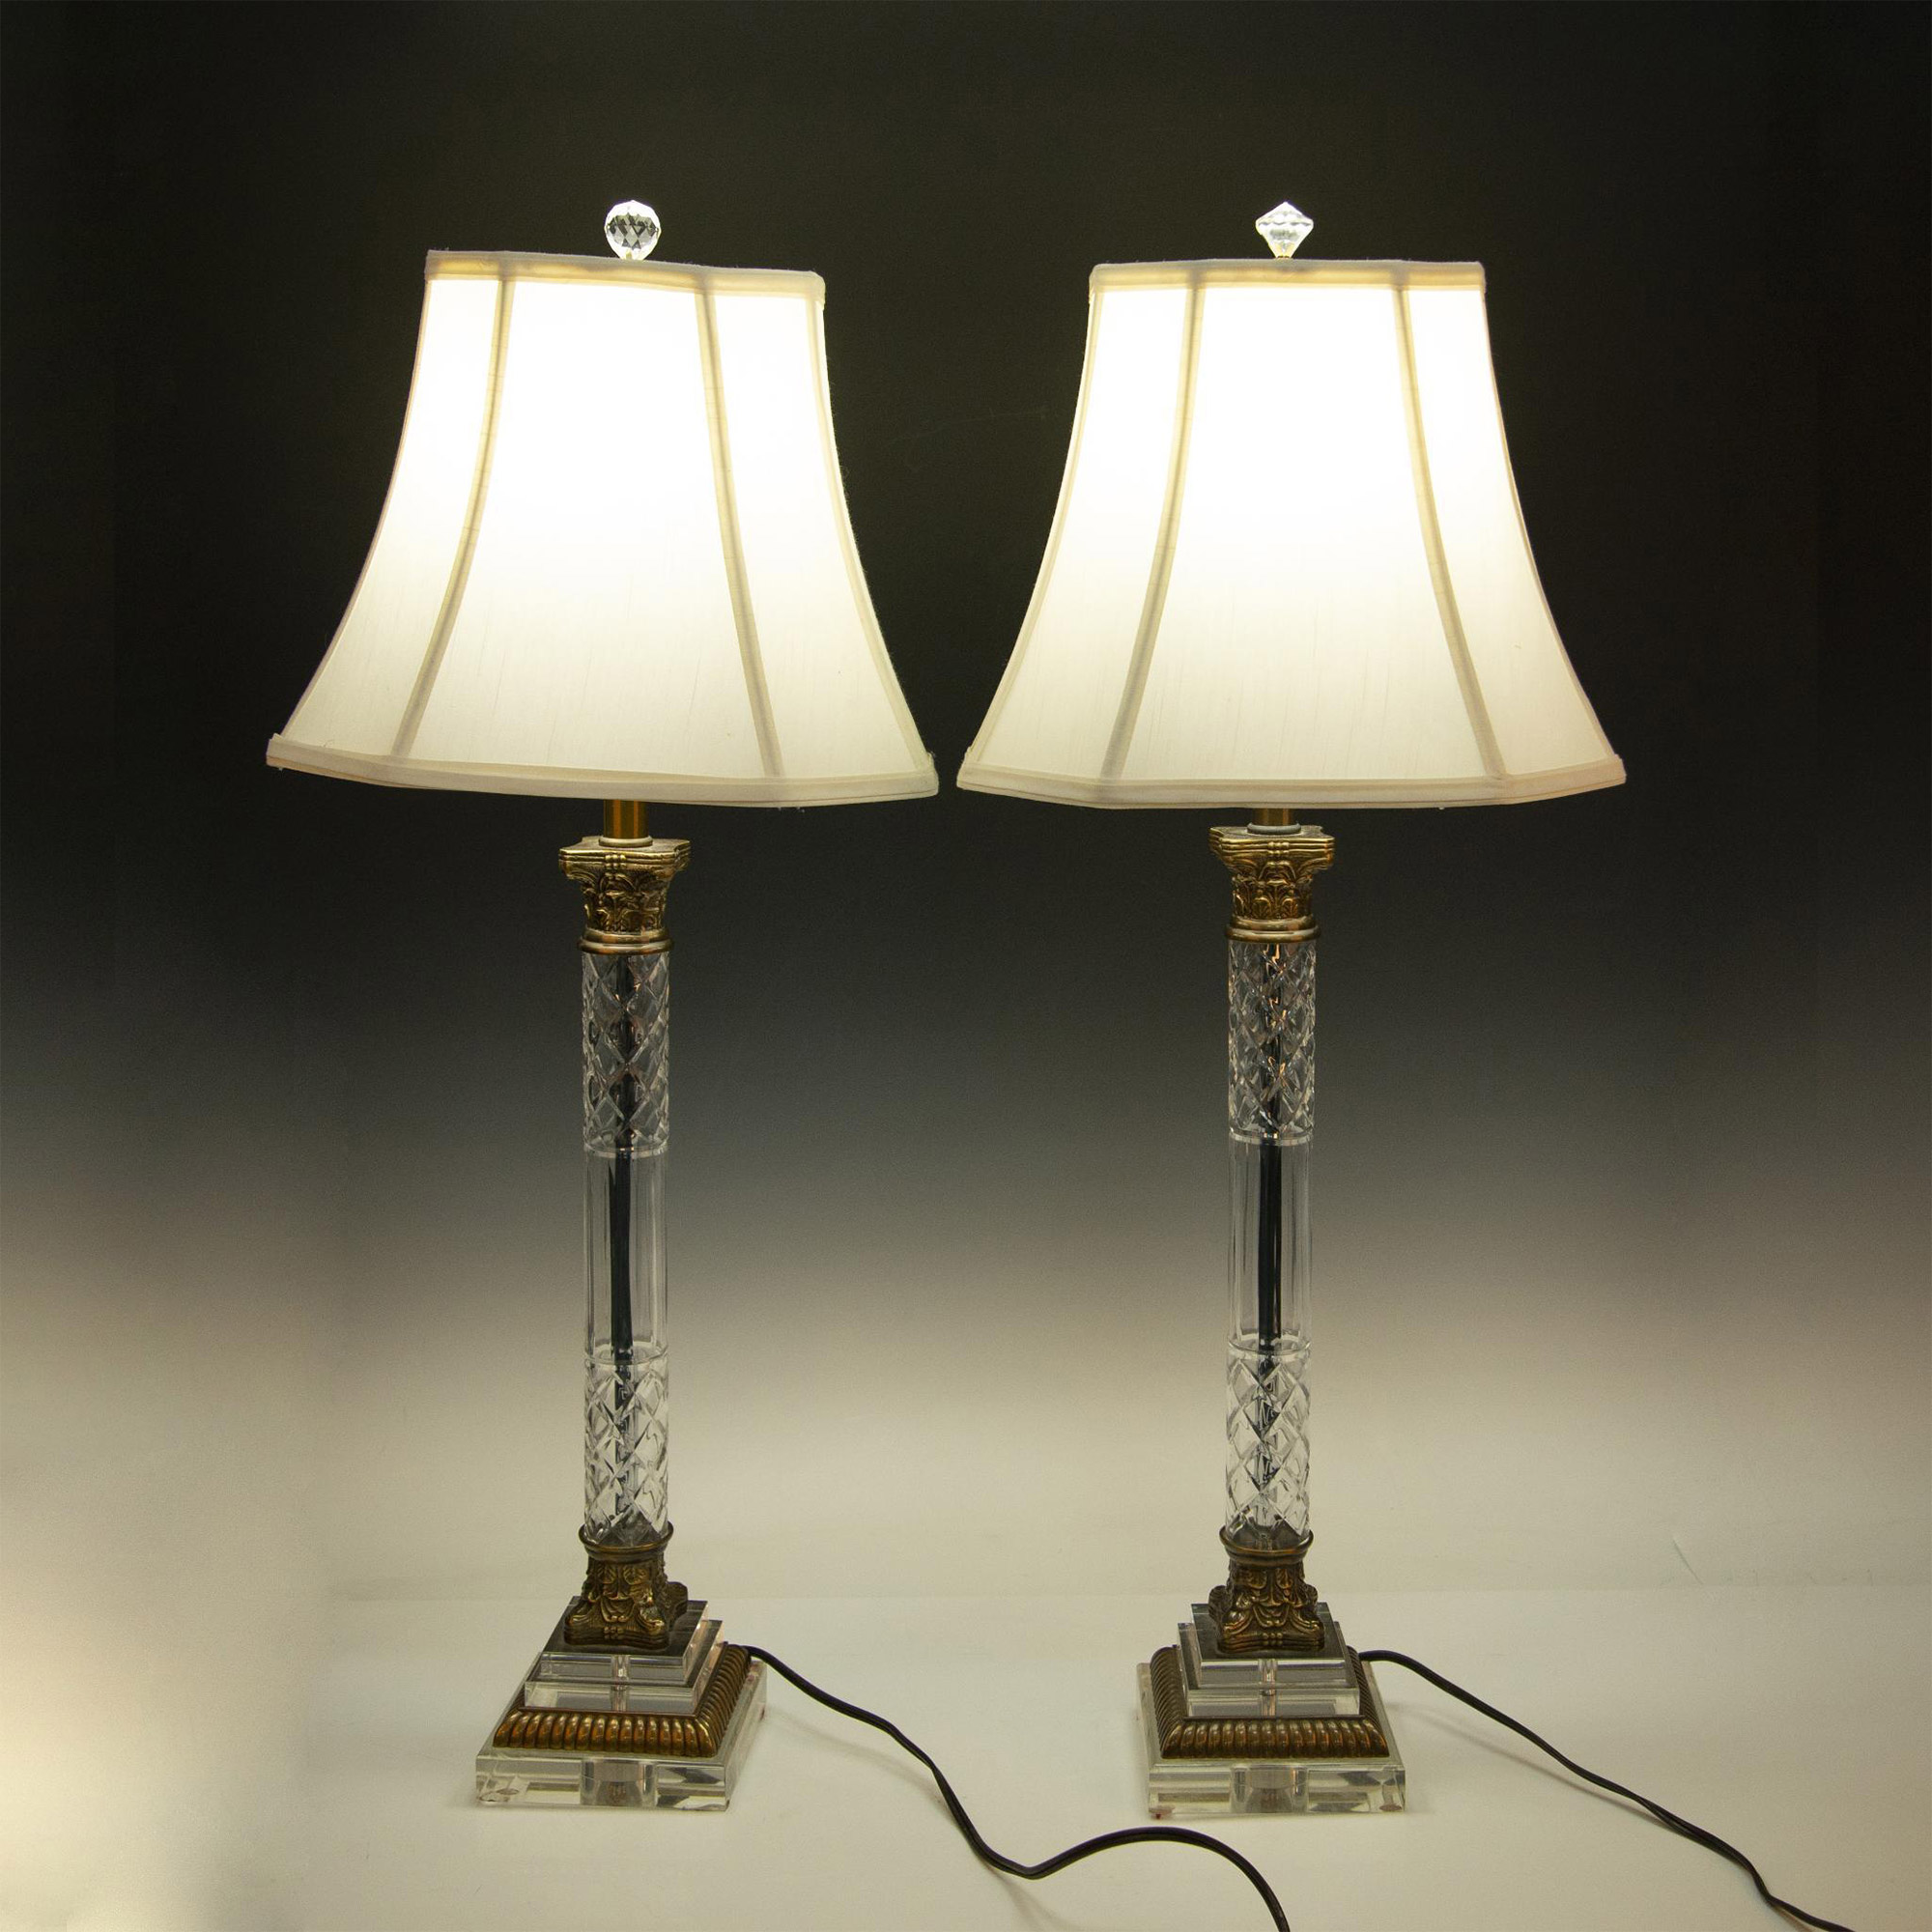 Pair of Baroque Style Cut Crystal Lamps - Image 2 of 6